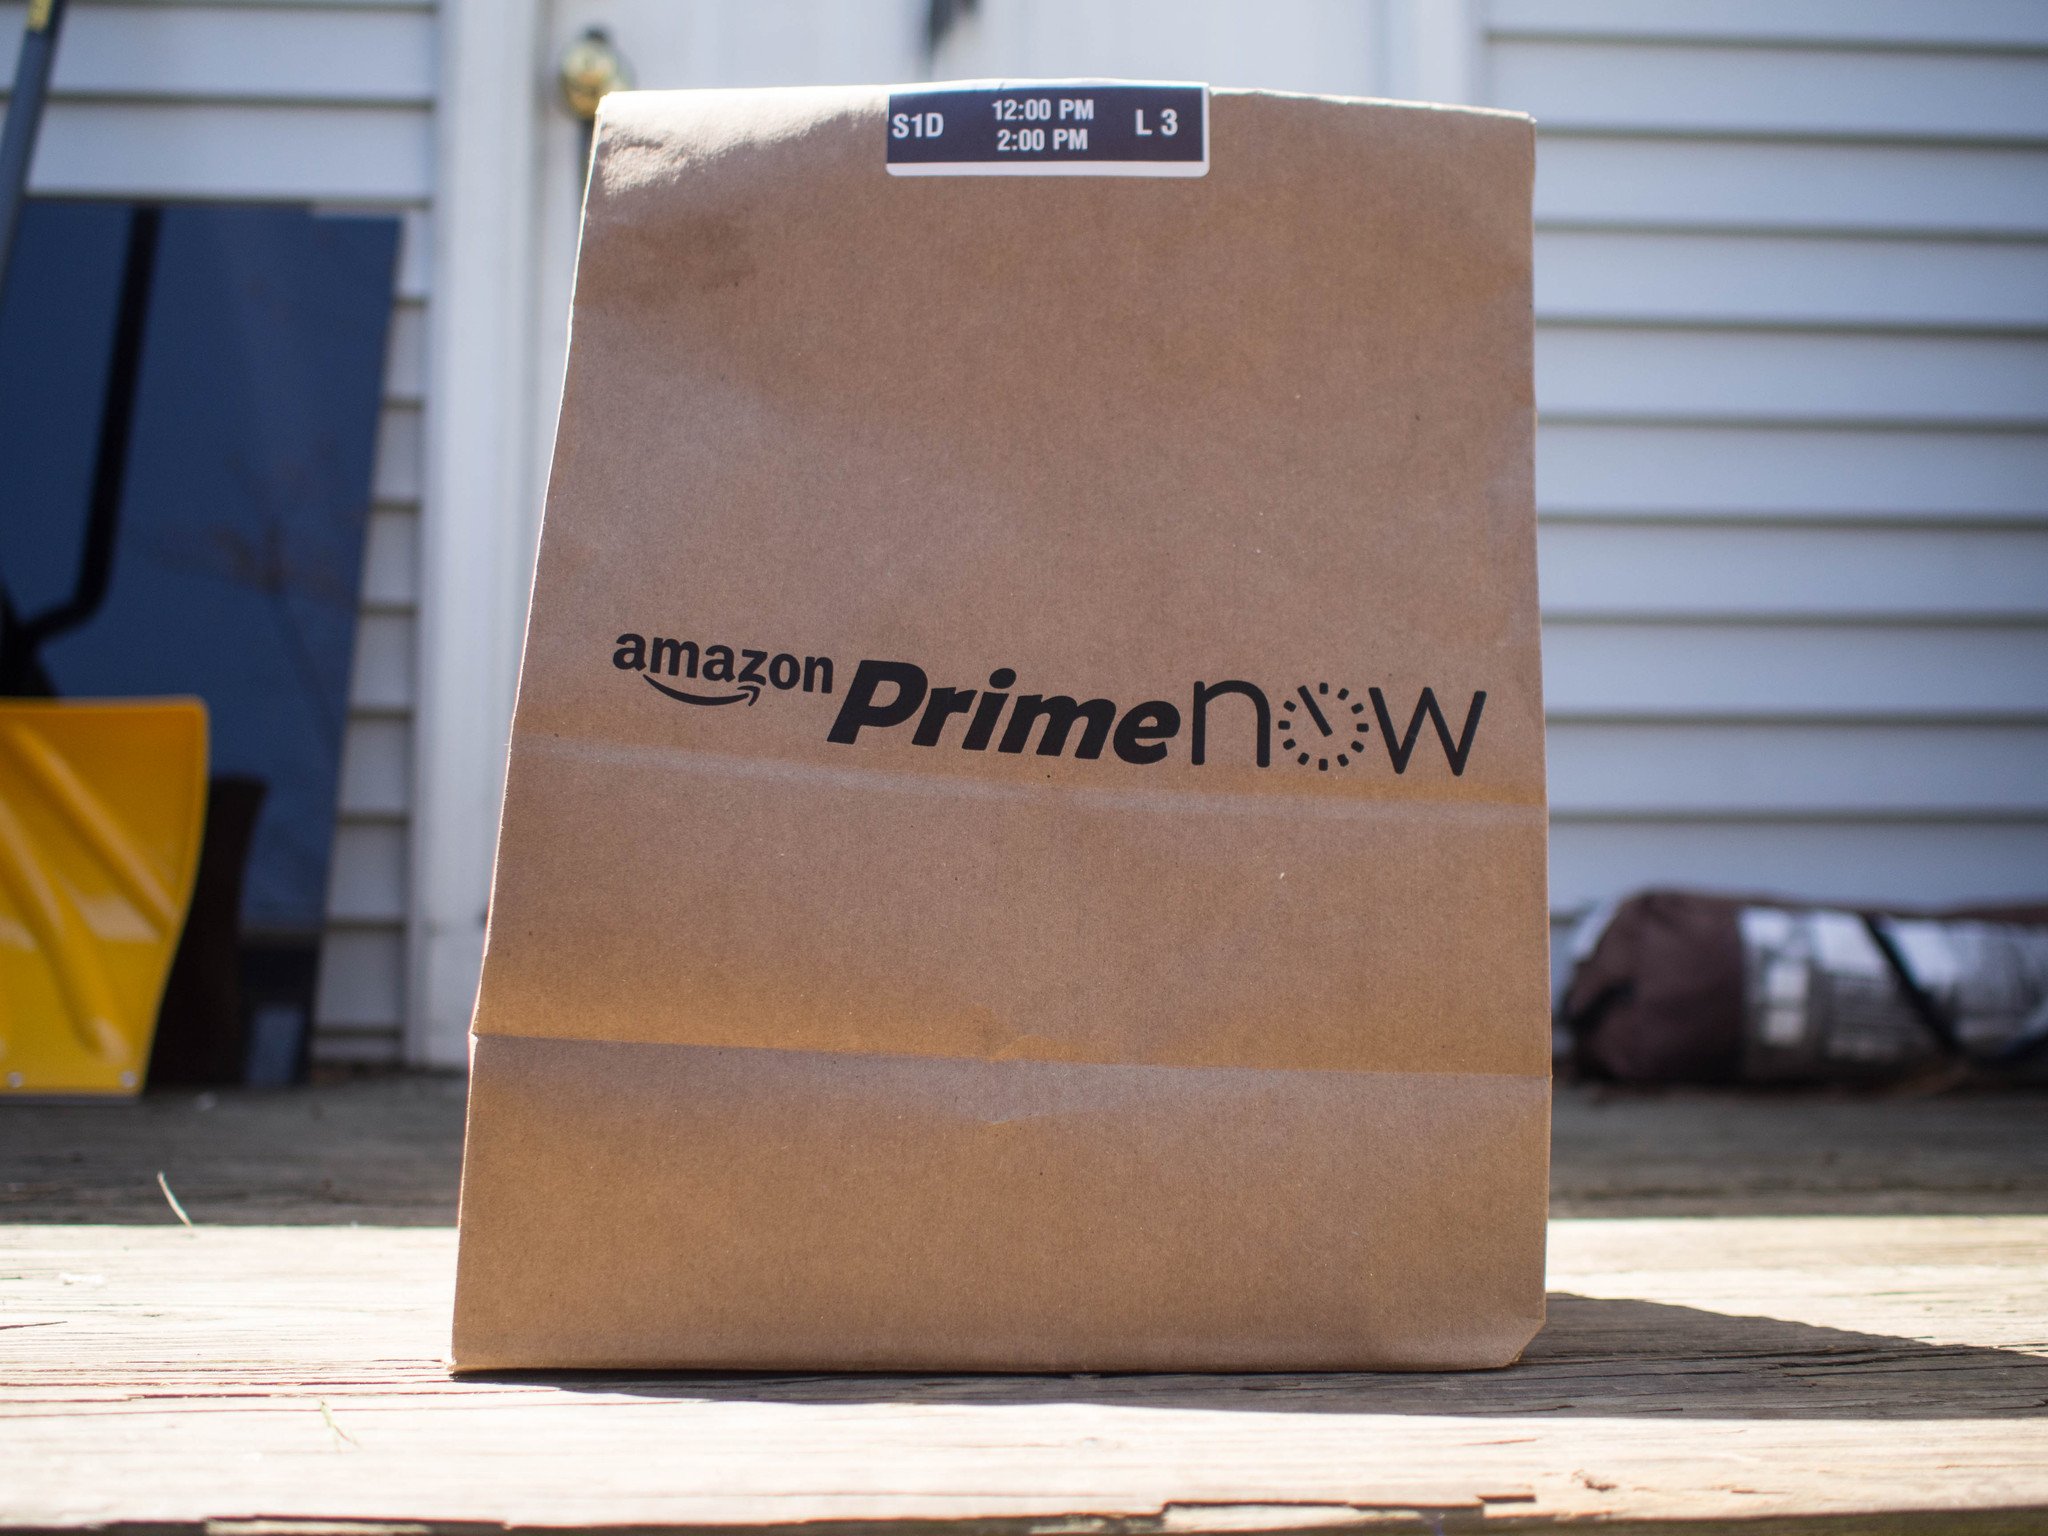 Amazon Prime Now expands to cover more of London | Android Central